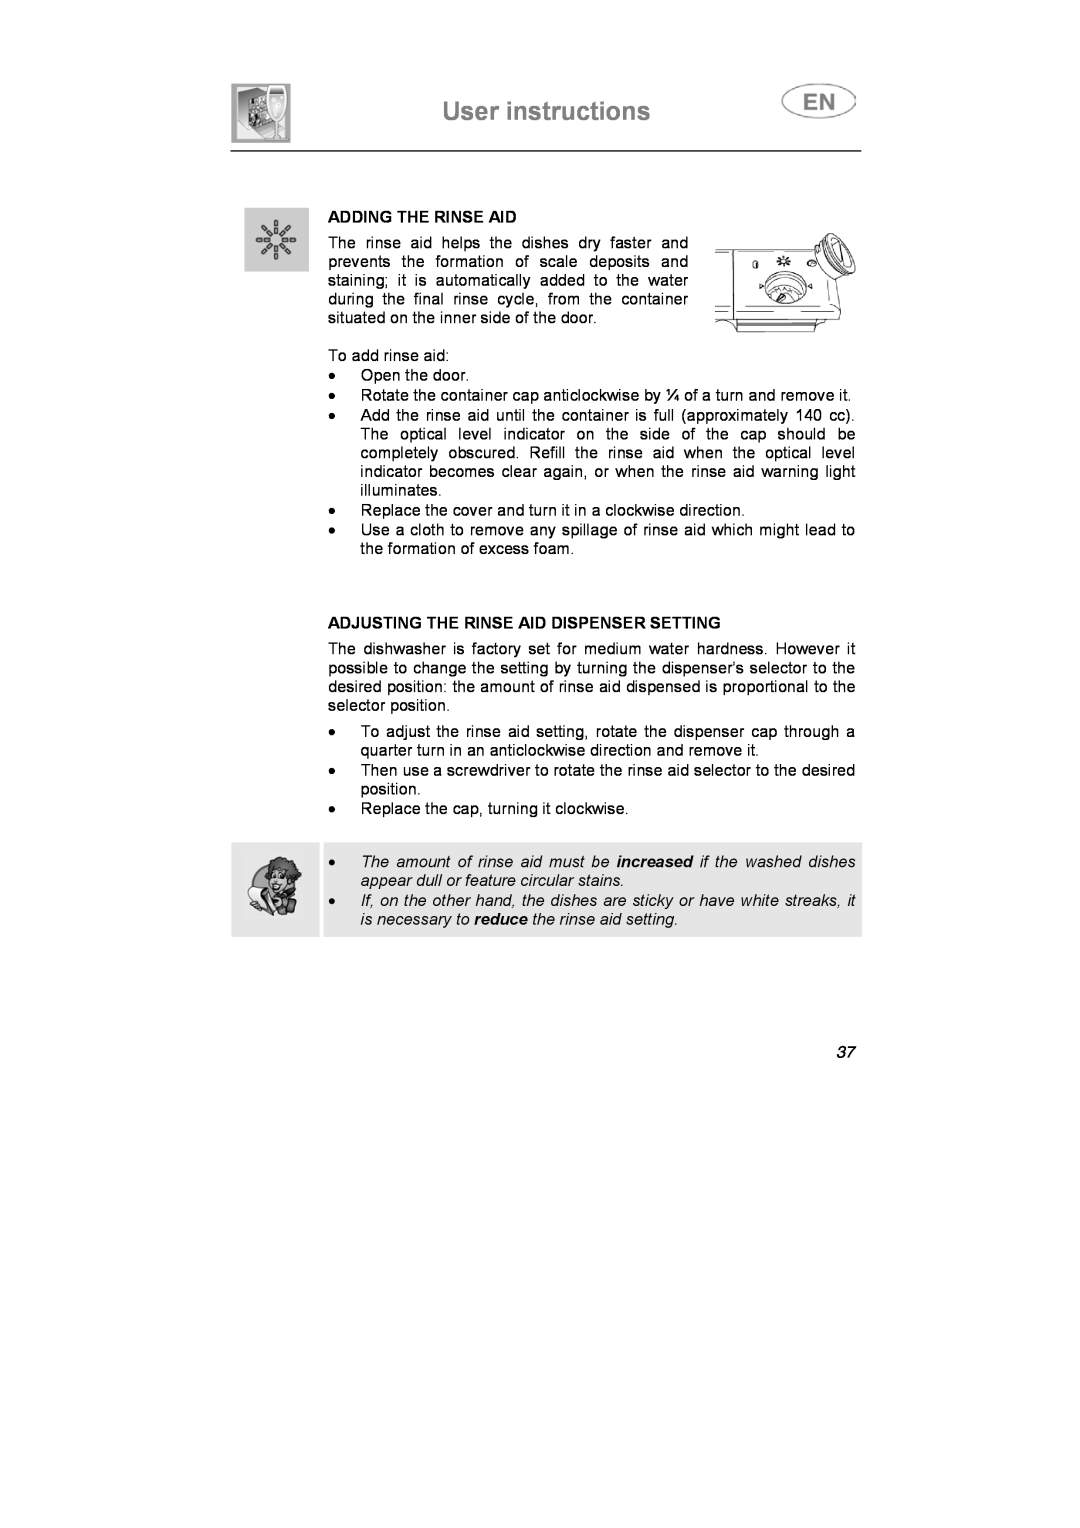 Smeg LS4647XH7 instruction manual User instructions, Adding The Rinse Aid, Adjusting The Rinse Aid Dispenser Setting 